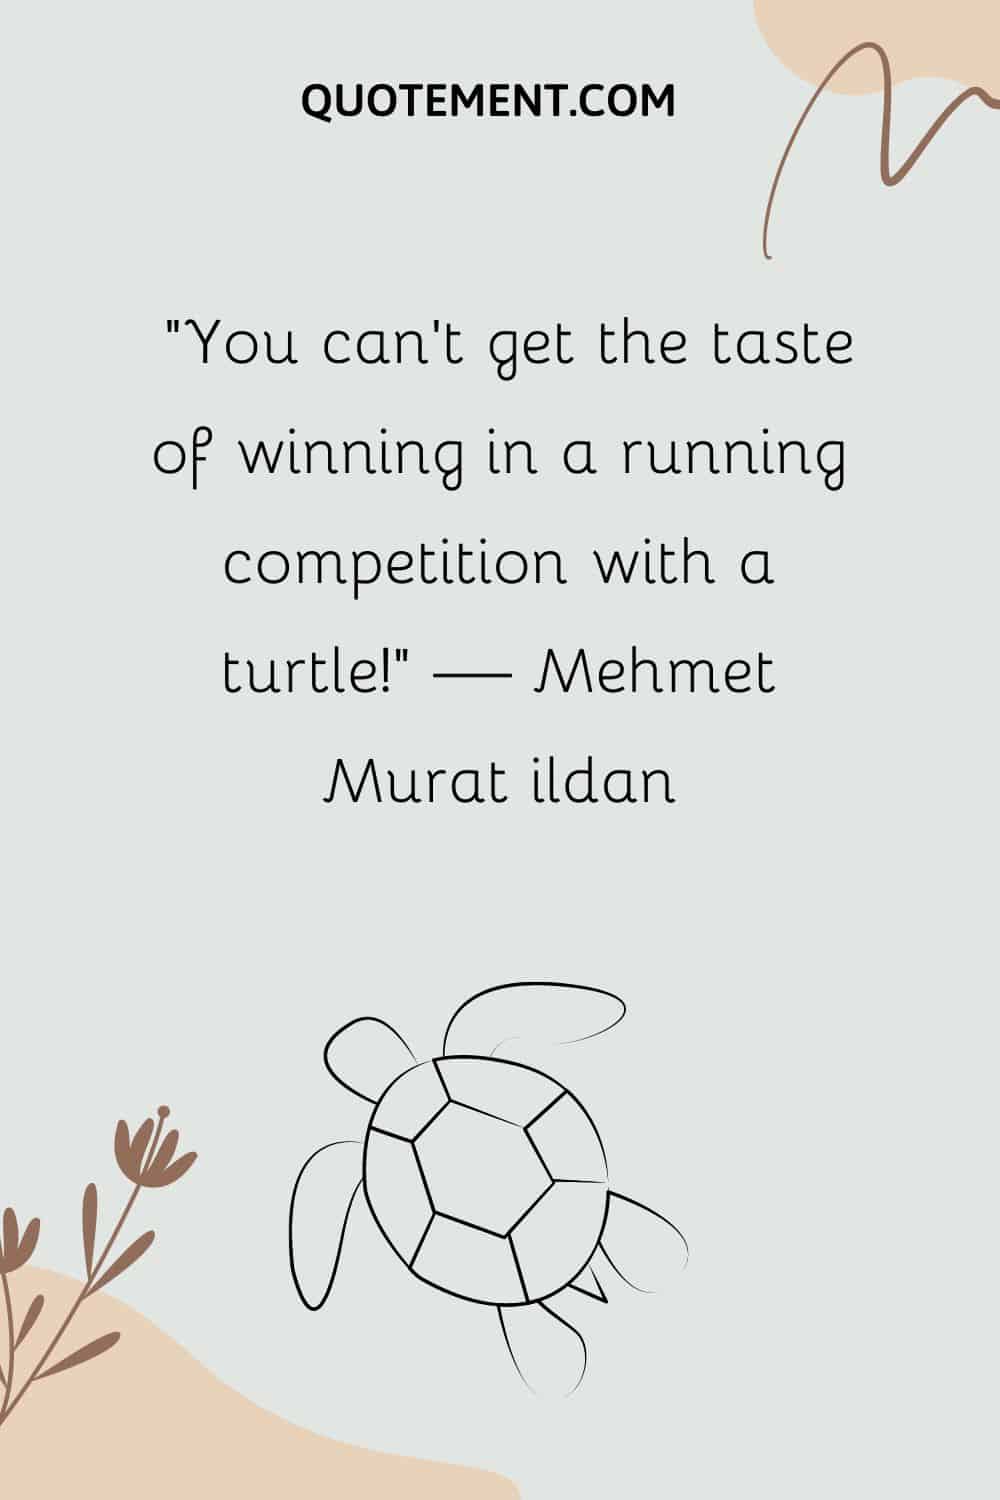 You can’t get the taste of winning in a running competition with a turtle